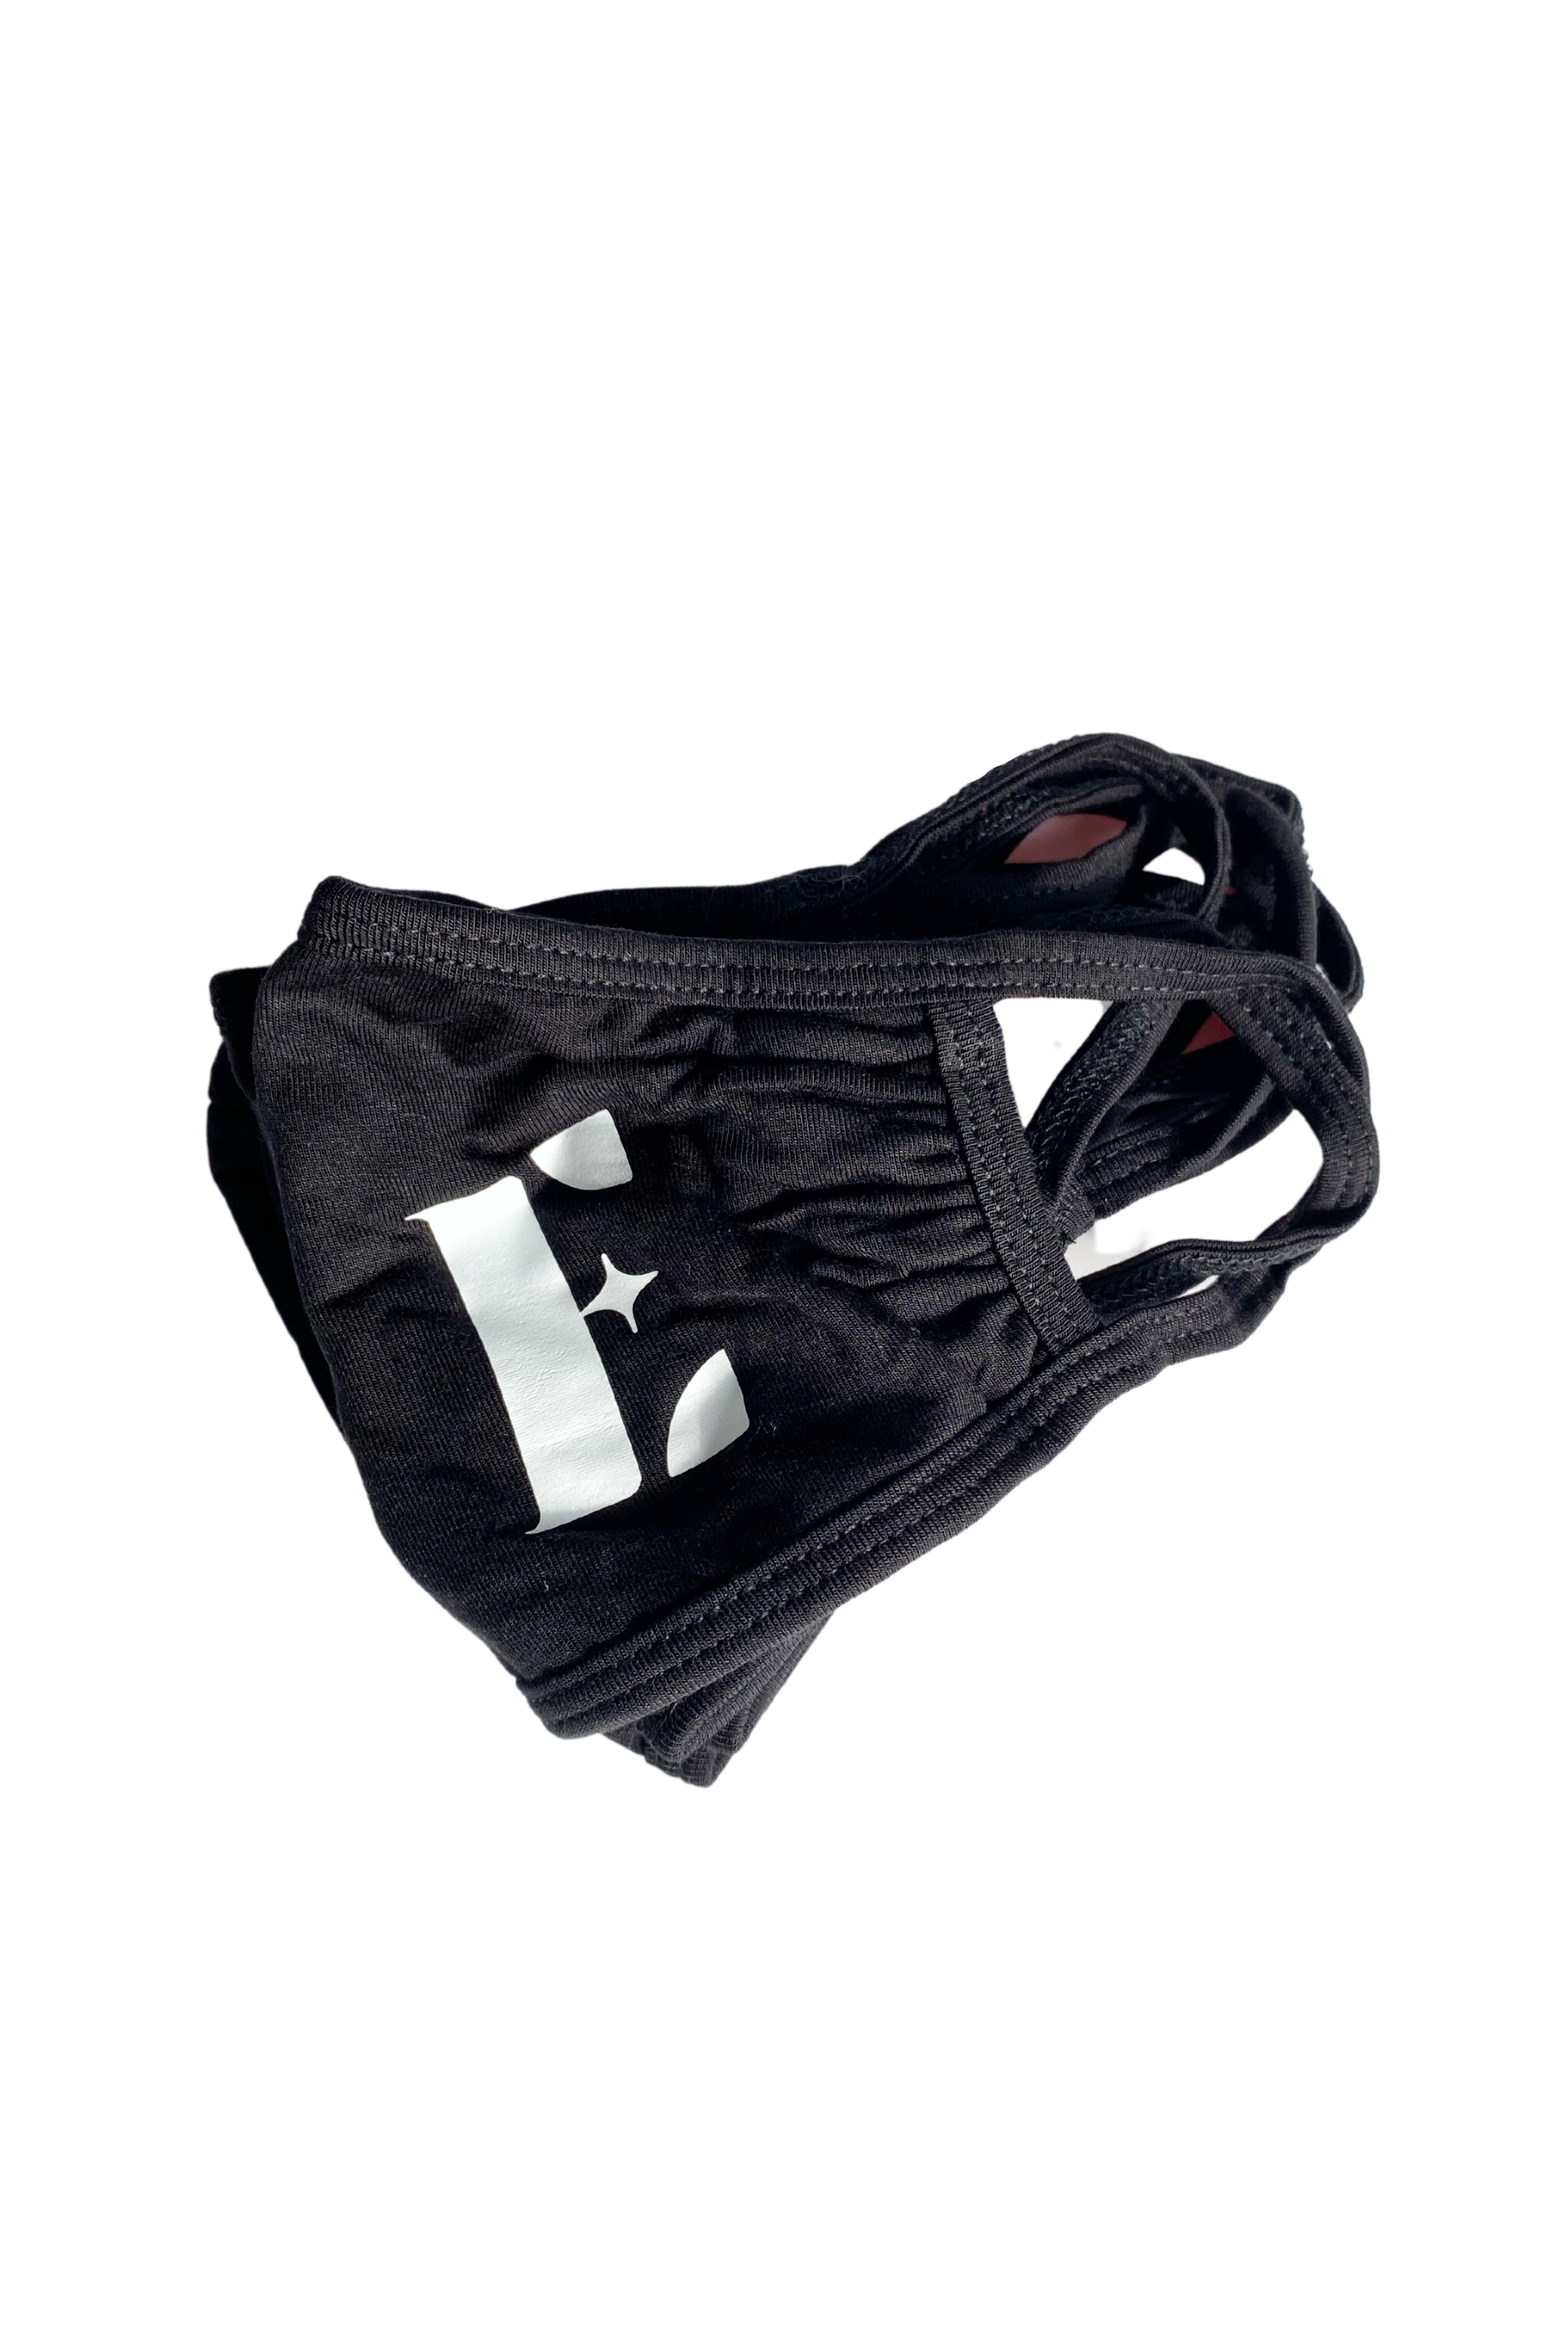 Black reusable face mask. The face mask has the E's Element logo imprinted in white. Smoky Black Face Mask by E's Element.